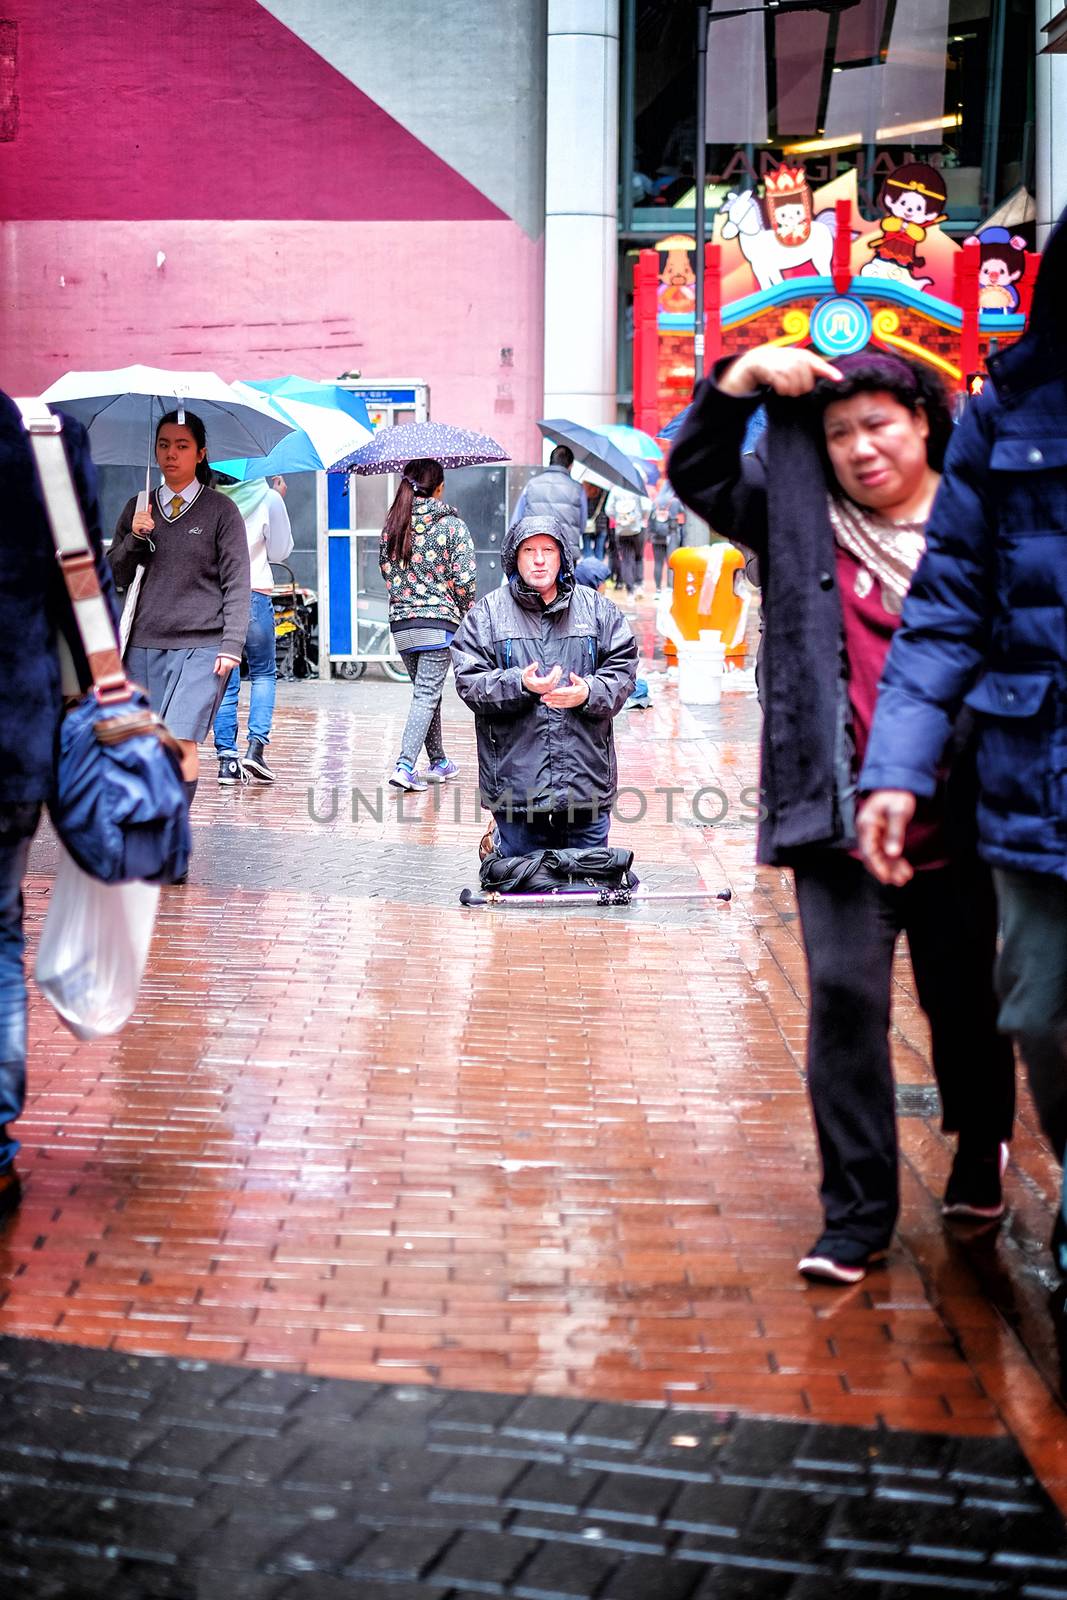 Hong Kong January 15 2016 : People passing a homeless man praying on the street on the rainy day in Hong Kong city in 15 Jan 2016